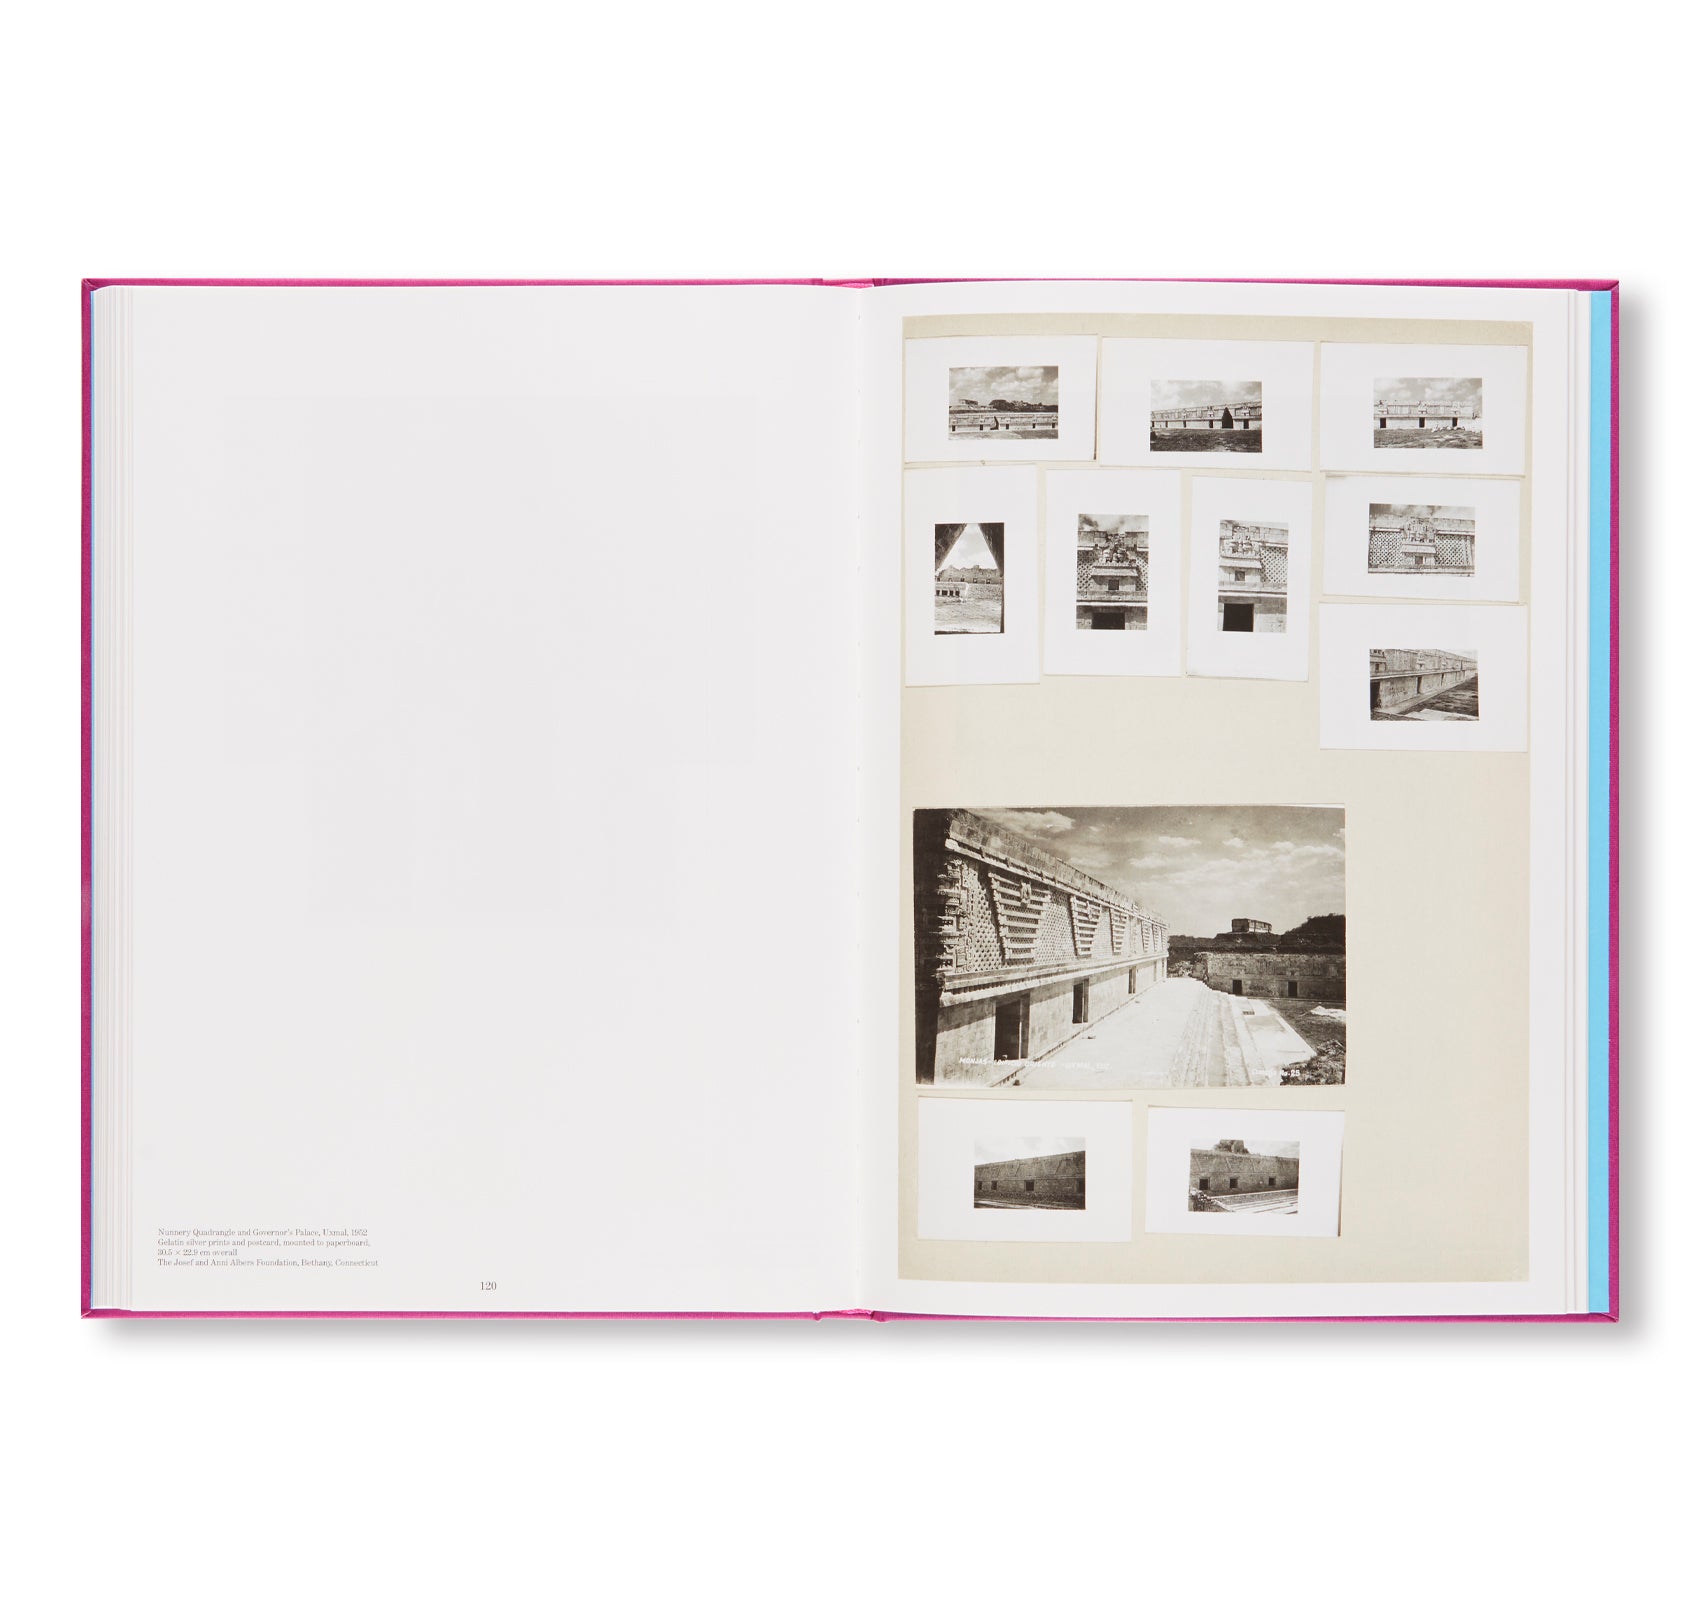 JOSEF ALBERS IN MEXICO by Josef Albers